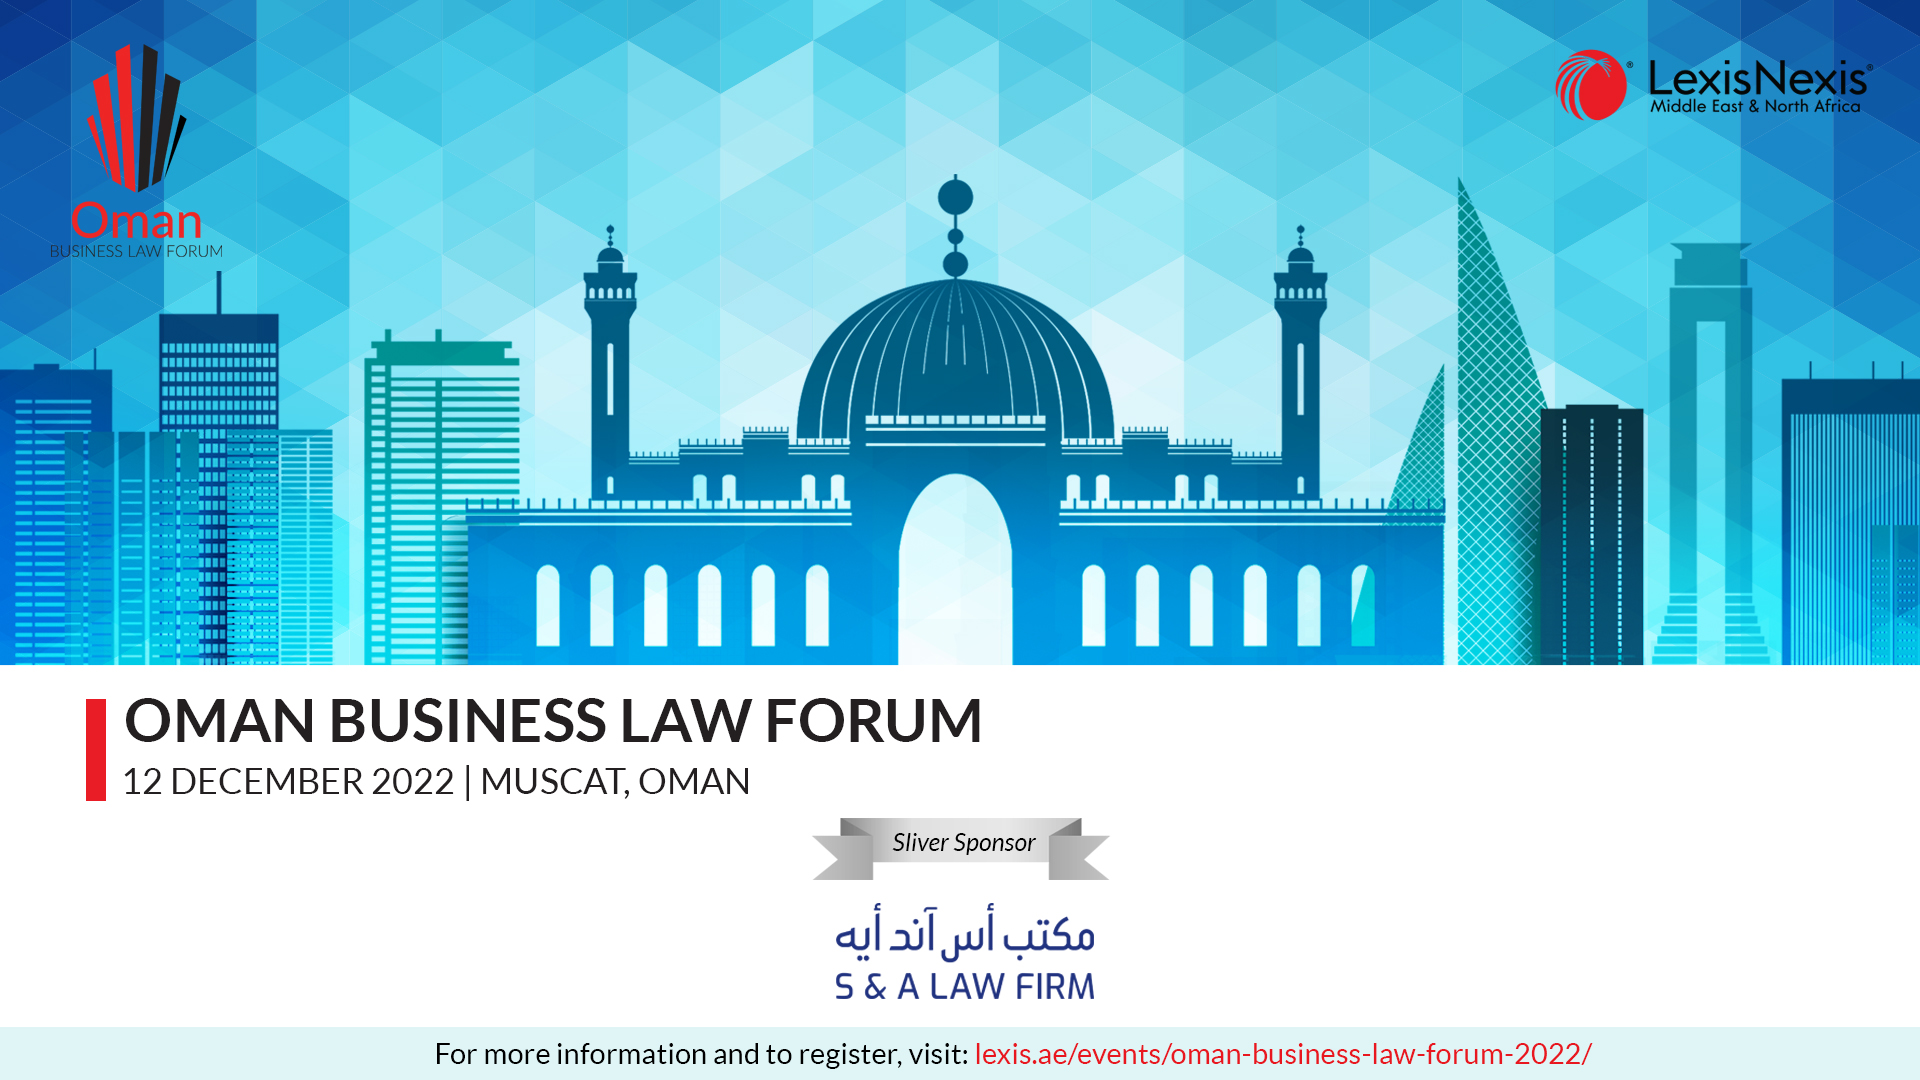 S & A Law Firm participates as a Silver Sponsor of the Oman Business Law Forum Conference 2022 – 5th Edition!